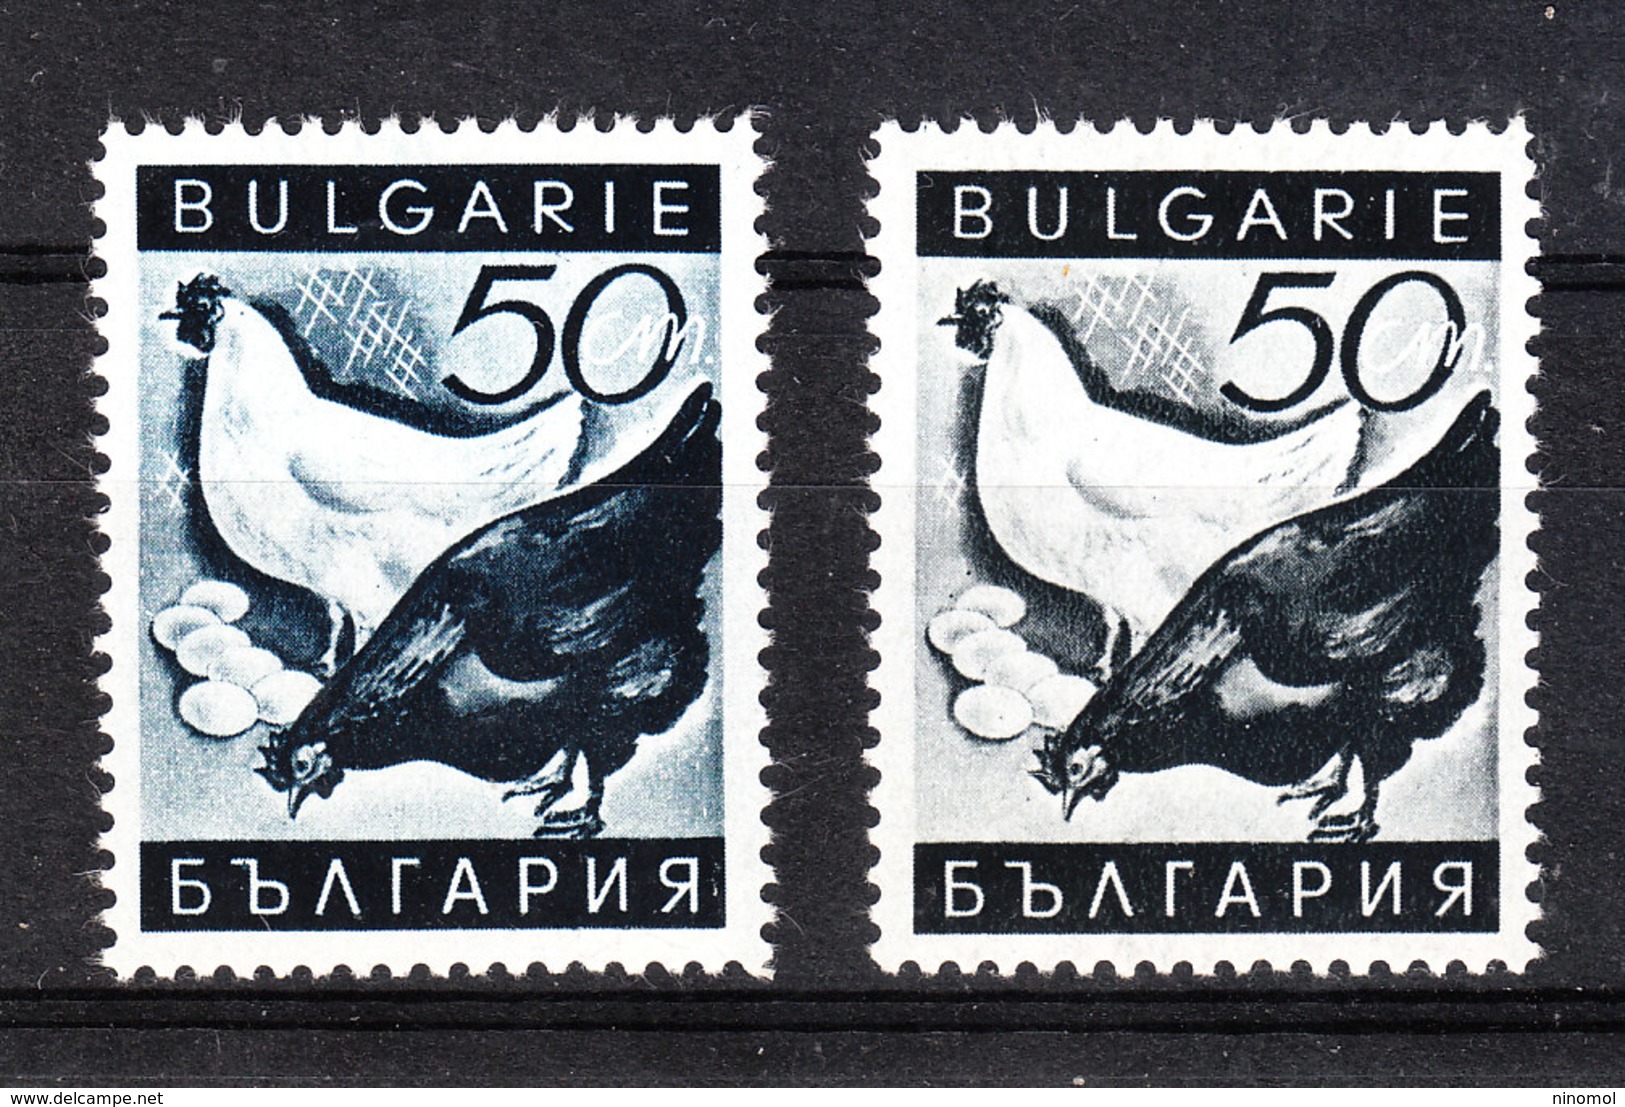 Bulgaria - 1938. Galline. I 2 Soli Francobolli Della Serie" Animali ". Hens. Only 2 Stamps Of The Series "Animals".MNH - Gallinacées & Faisans